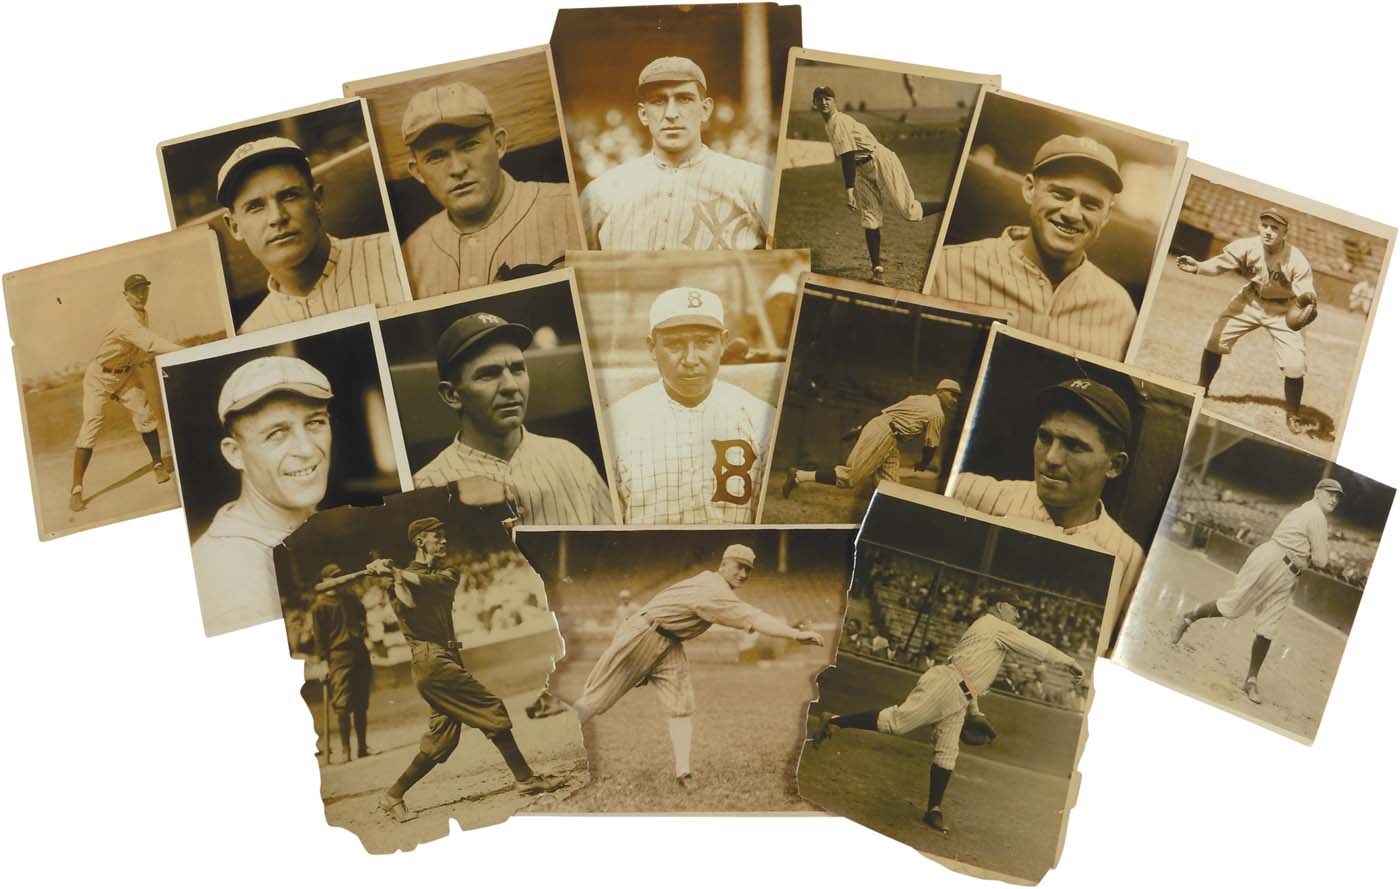 Baseball Memorabilia - 1910s-20s Vintage Baseball Photograph Collection from NY Sports Editor Assistant (50+)